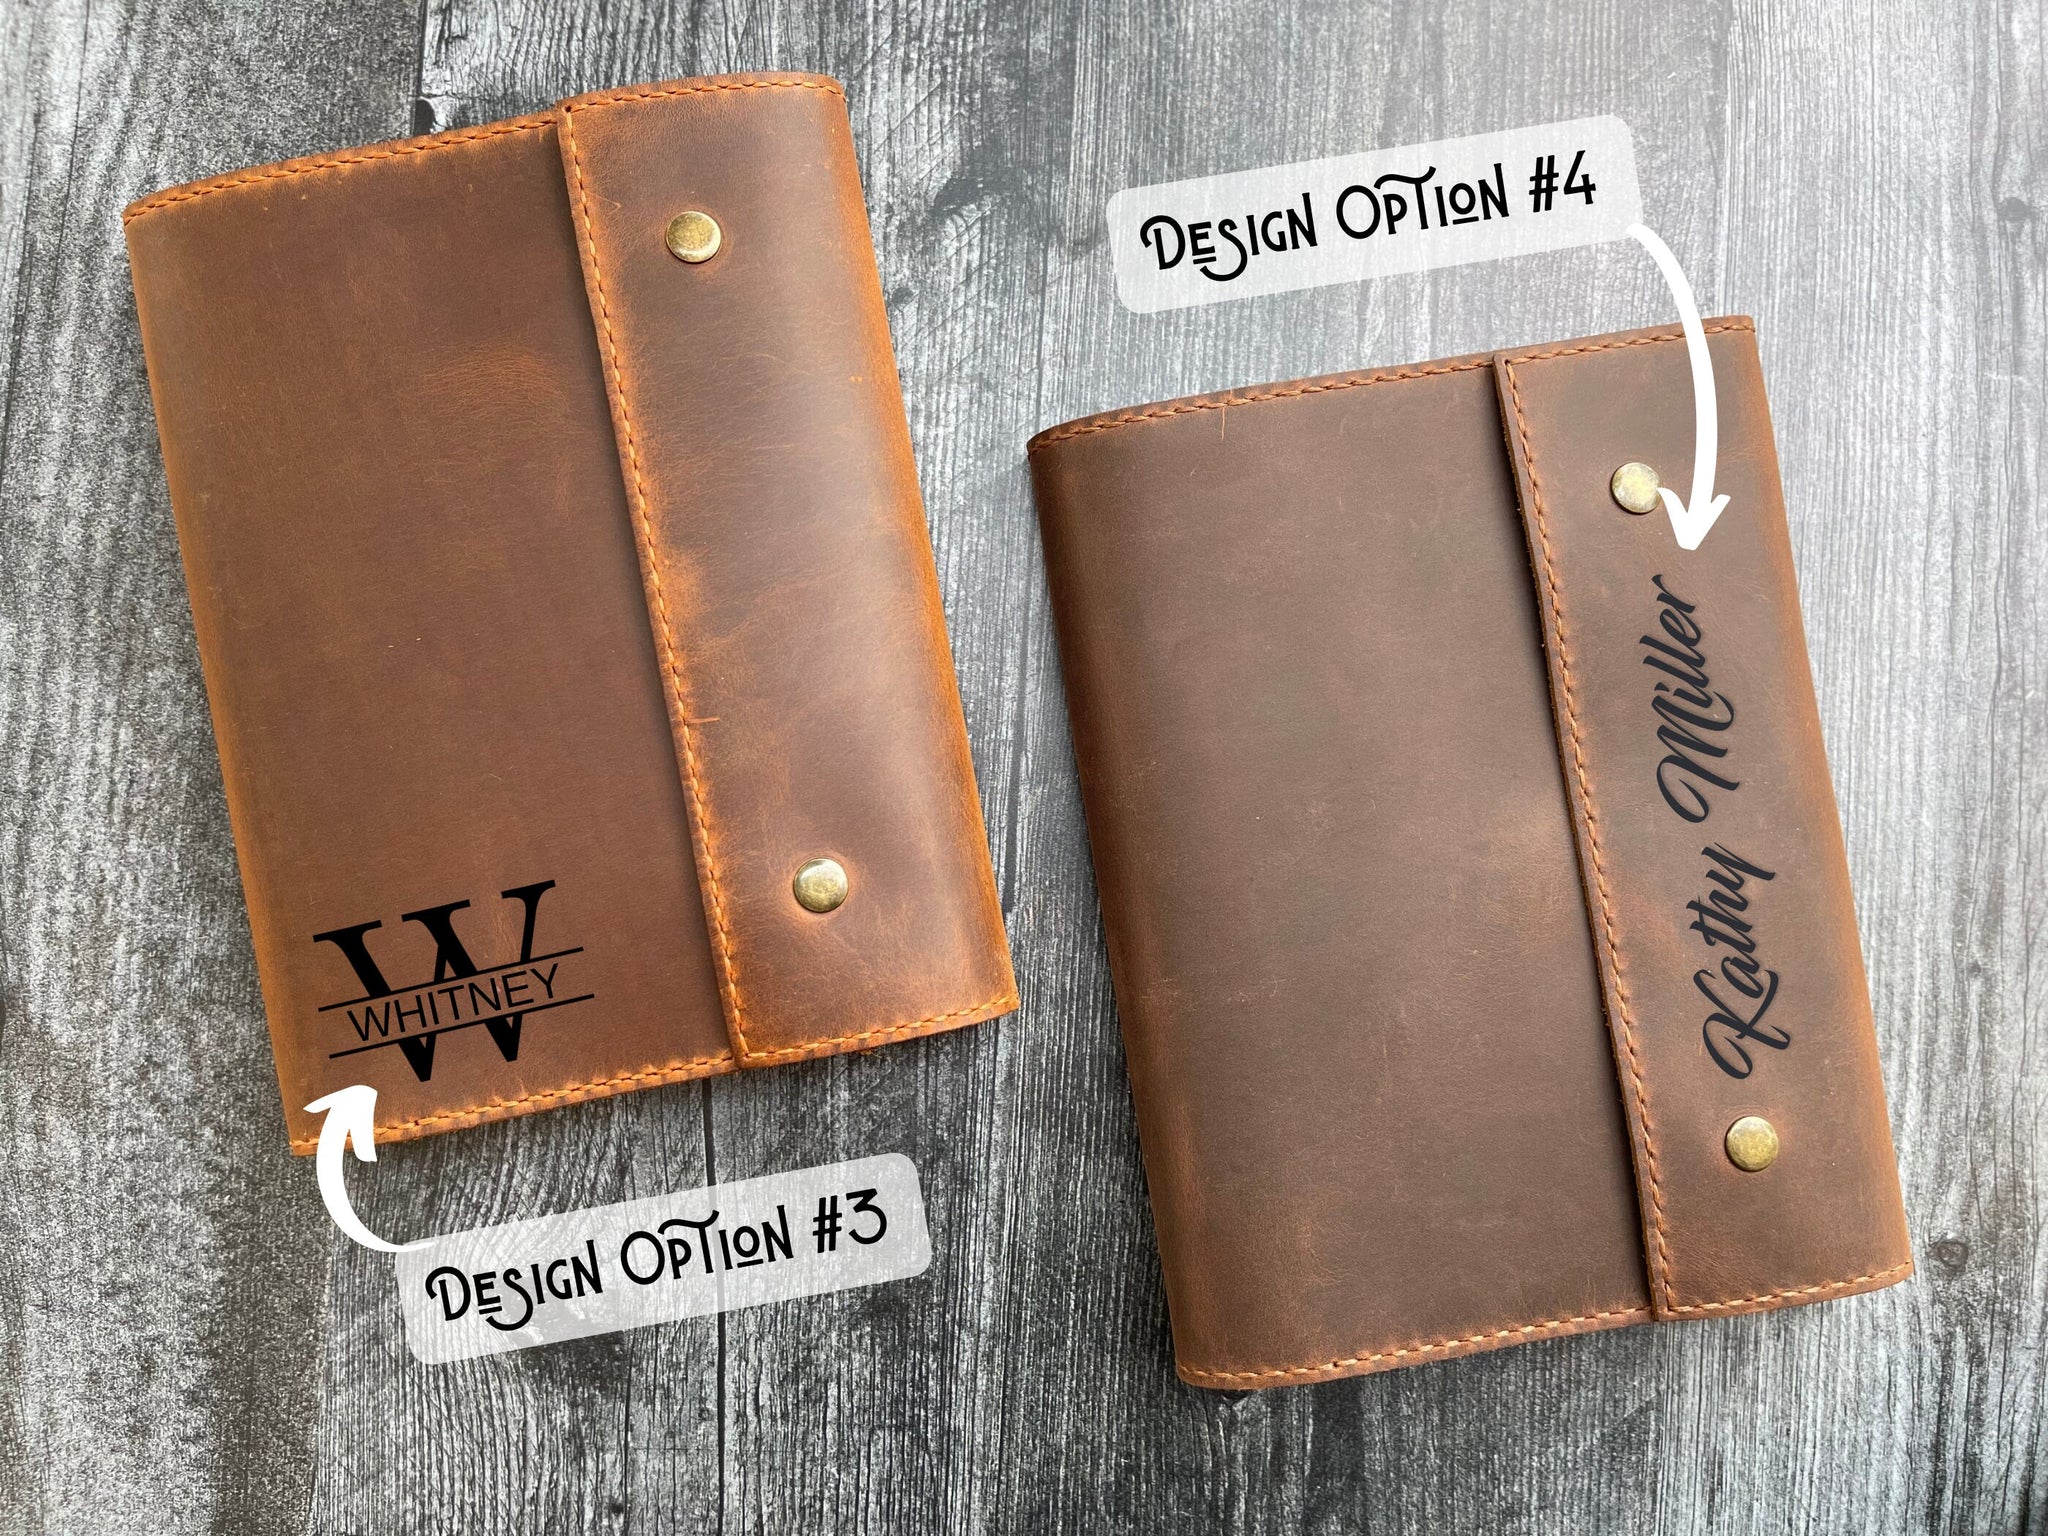 Personalized Leather Journal, A5 size Refillable Leather Cover, Bullet Journal with Journal, Travel Notebook,